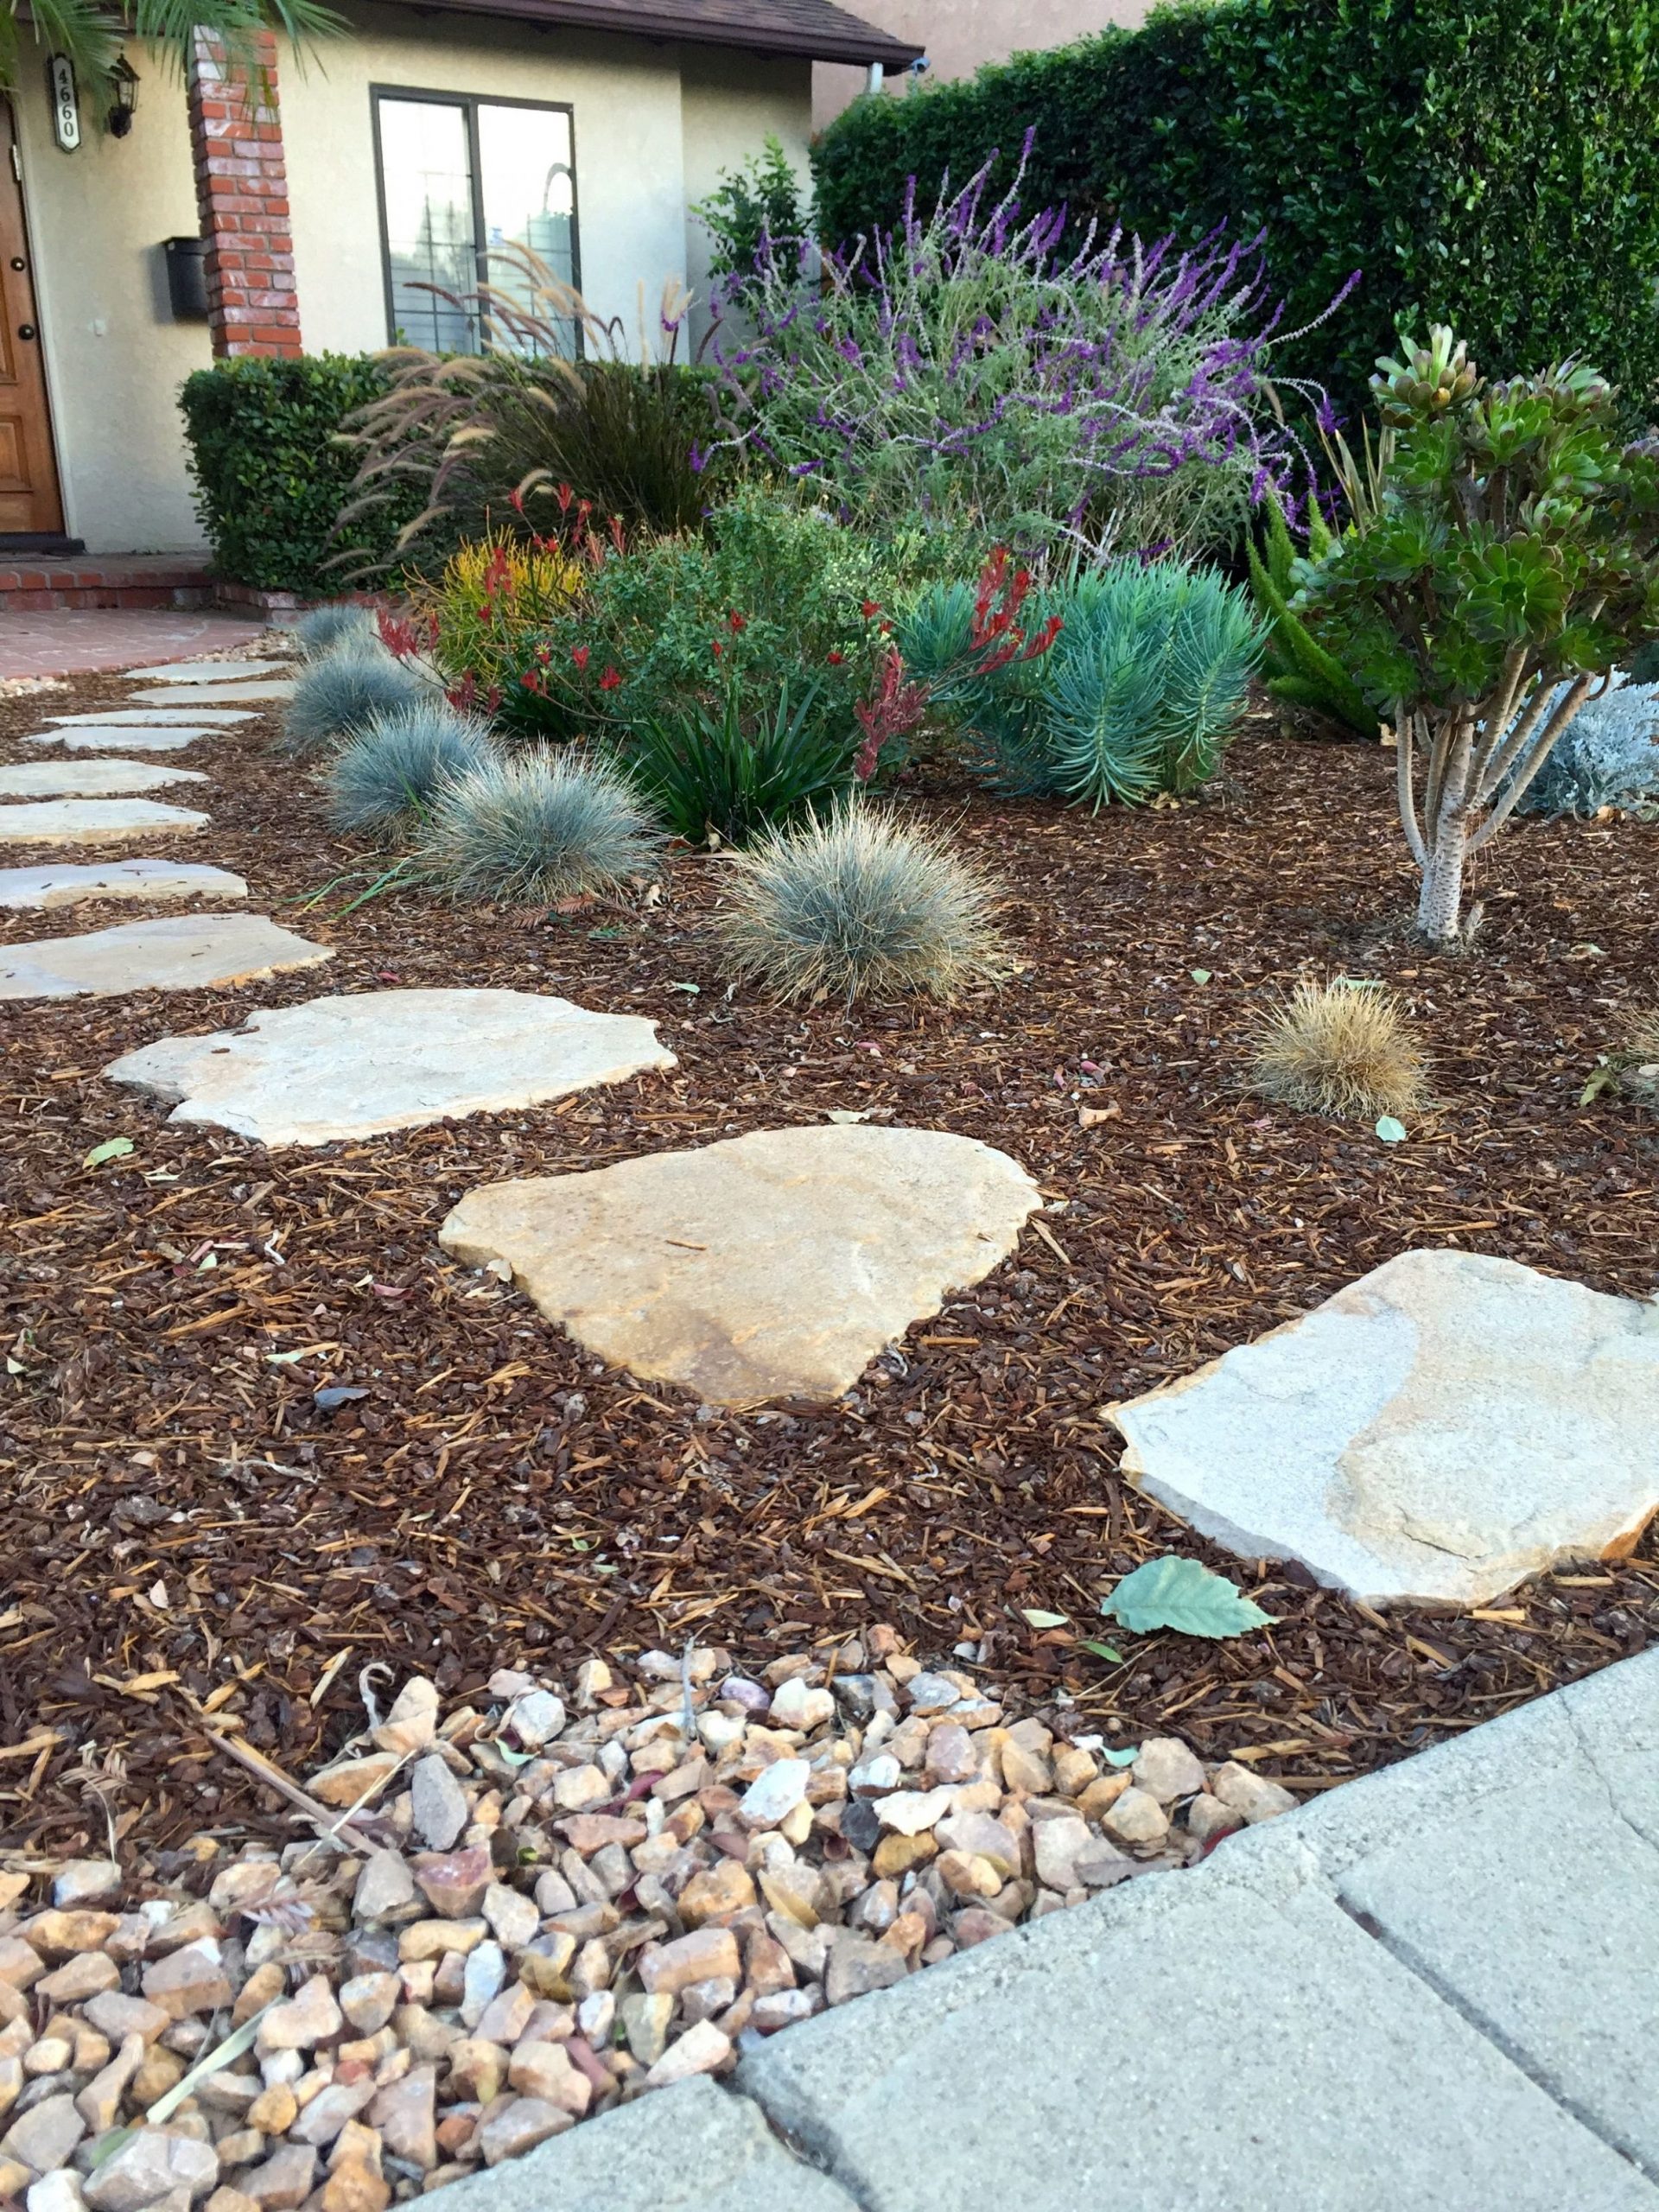 19+ Landscaping Ideas With Rocks And Mulch - 19 LanDscaping IDeas With Rocks AnD Mulch ScaleD